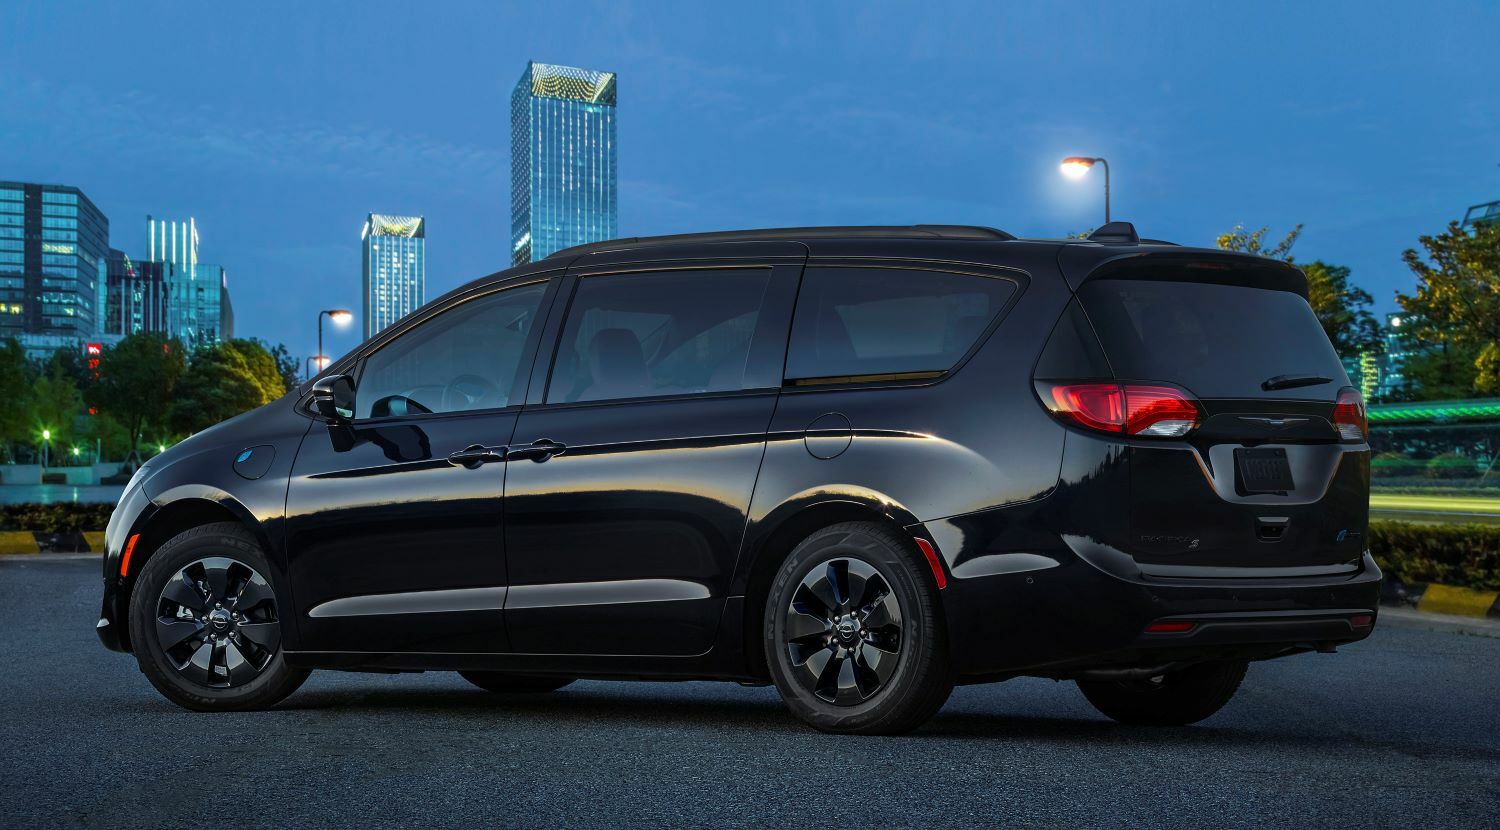 2020 Chrysler Pacifica Hybrid Review | PCMag